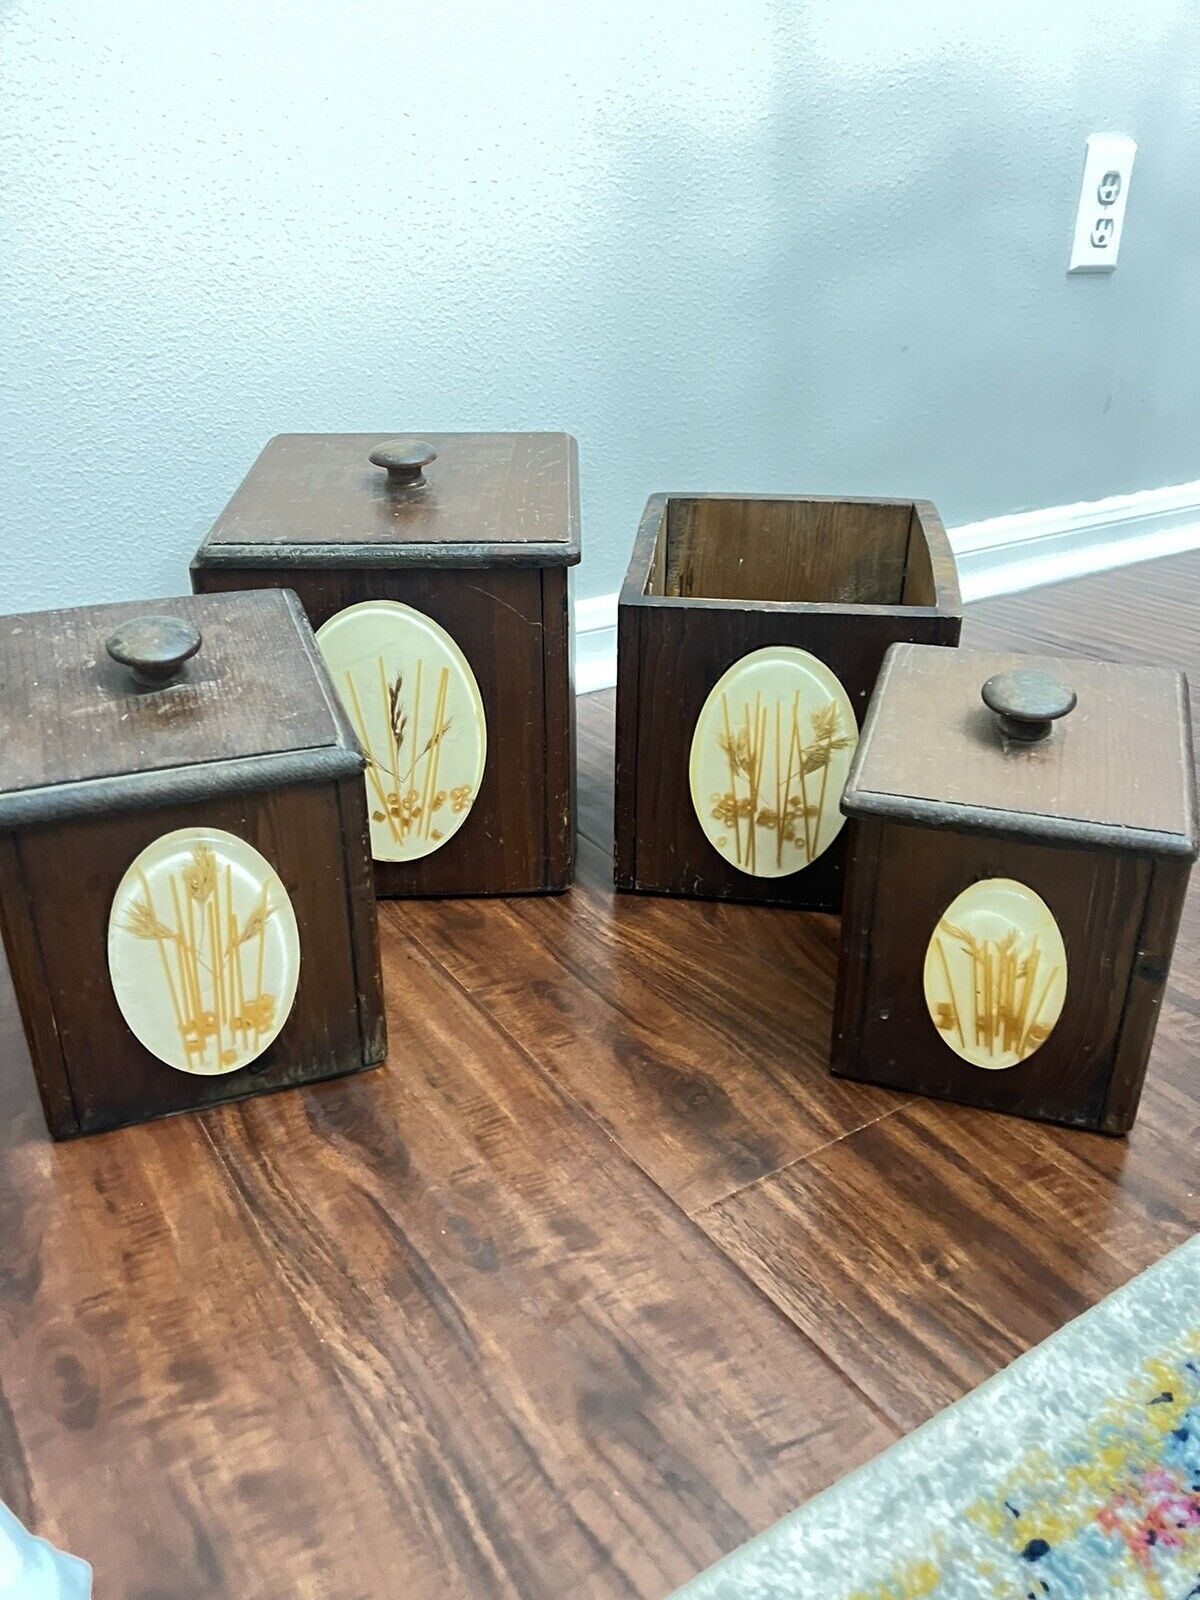 Vintage 4 Piece Wooden Kitchen Canister Set With Lucite Pictures.